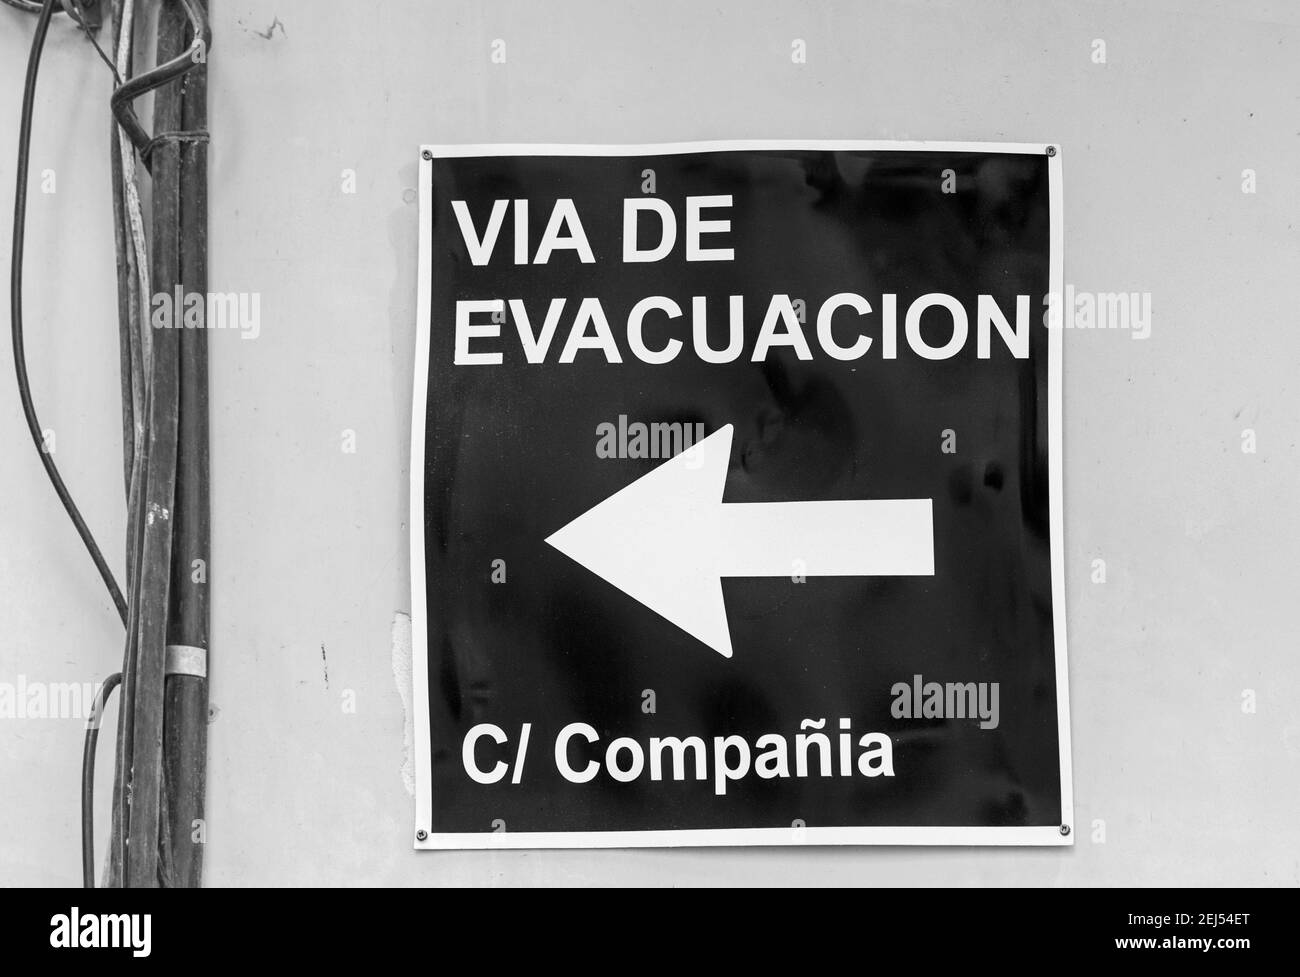 Real evacuation sign in spanish at day for attention in black and white Stock Photo